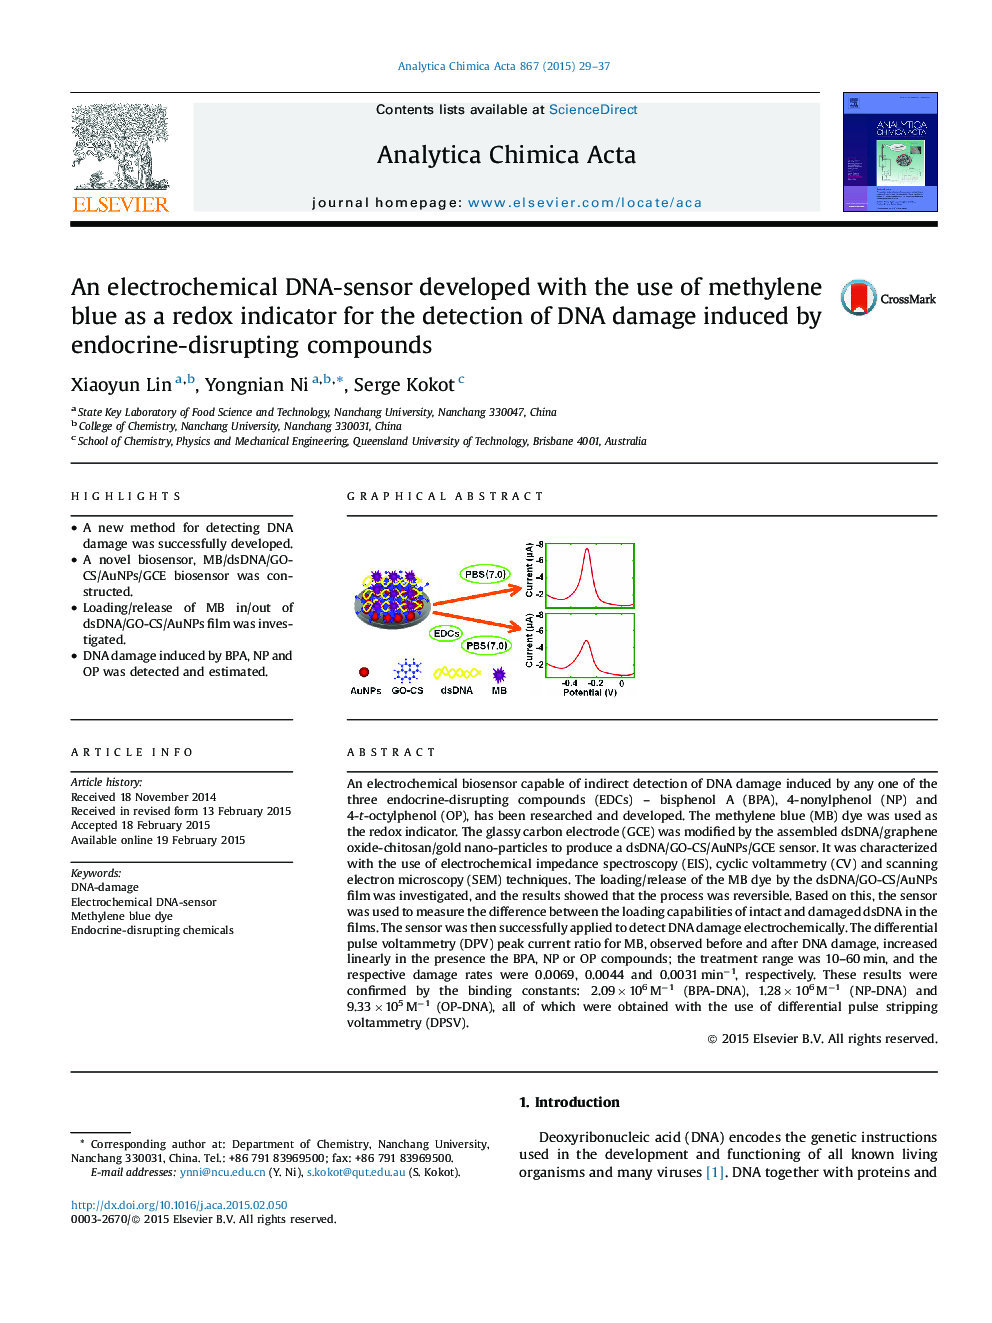 An electrochemical DNA-sensor developed with the use of methylene blue as a redox indicator for the detection of DNA damage induced by endocrine-disrupting compounds